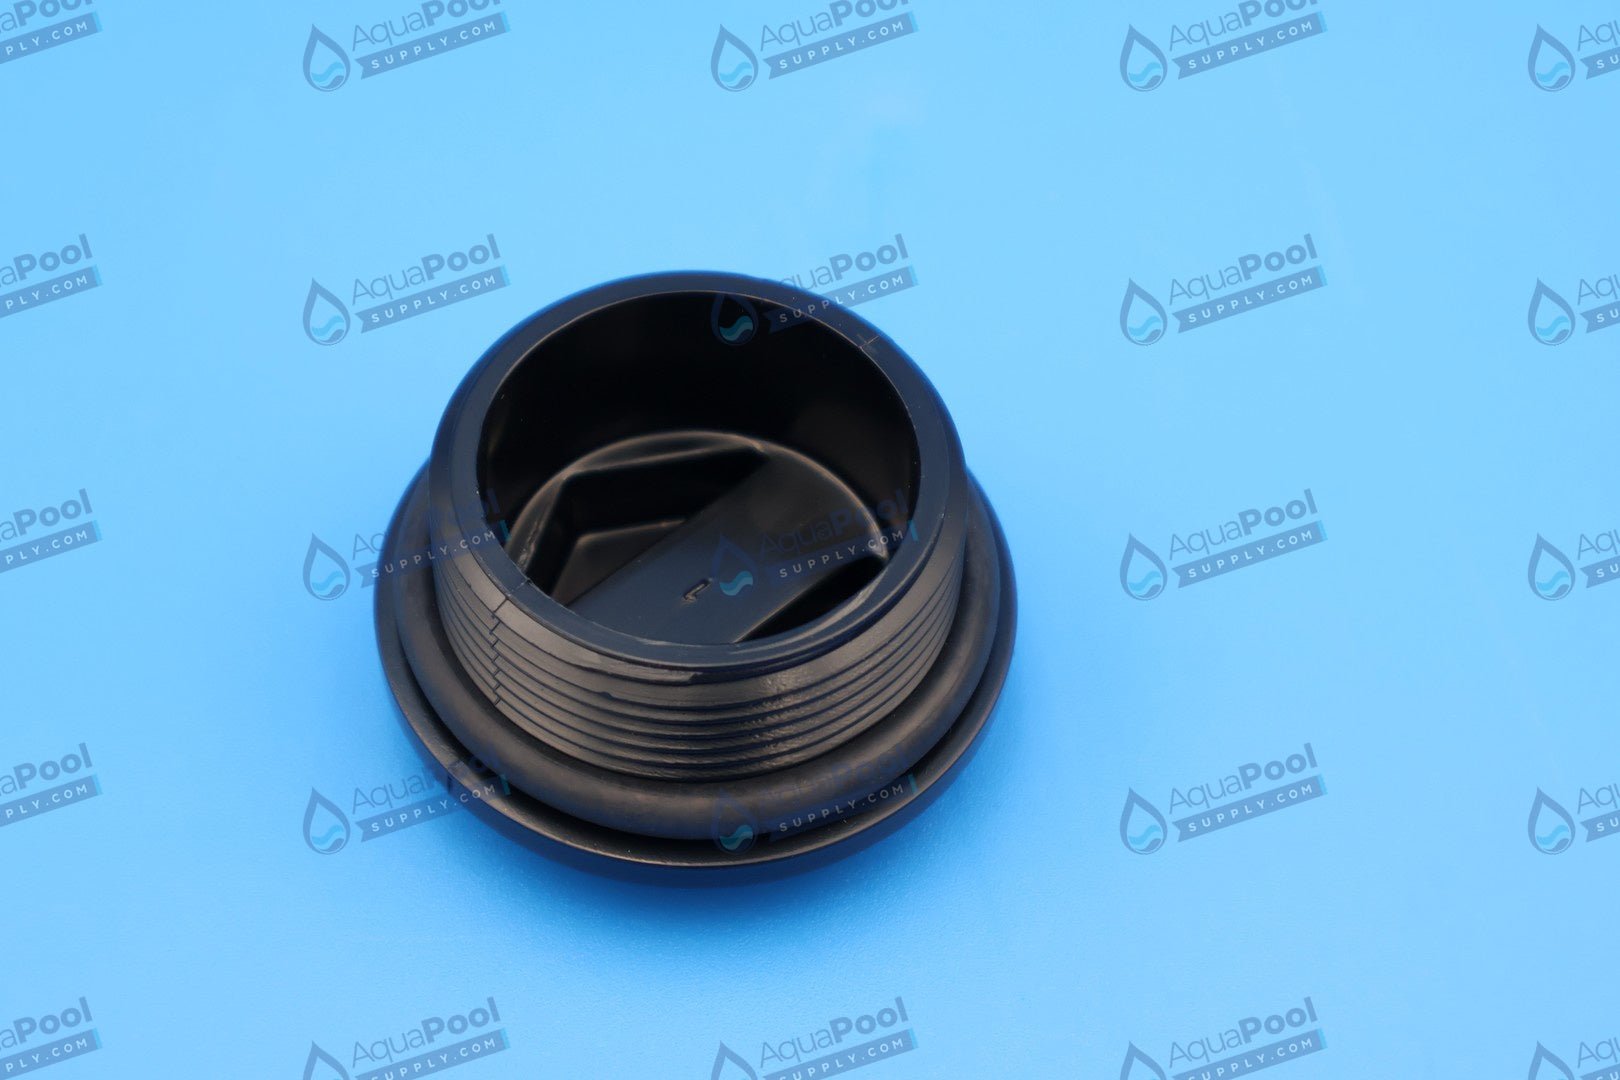 Pentair Clean and Clear Plus Drain Plug 86202000 - Pool Filter Parts